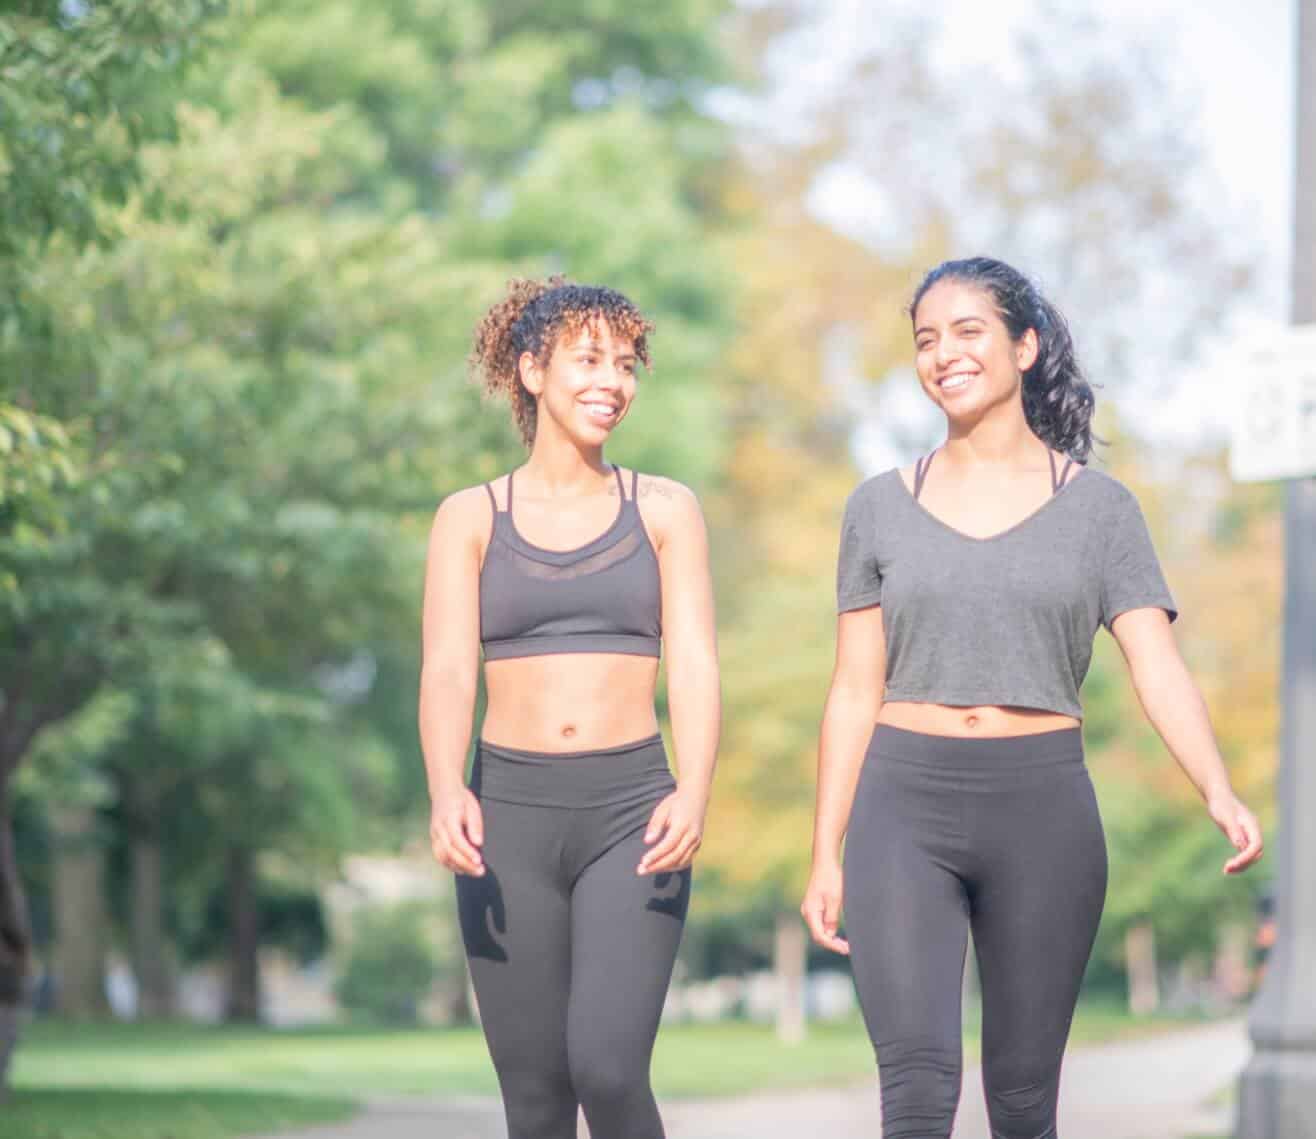 Find an accountability buddy to start losing weight at home